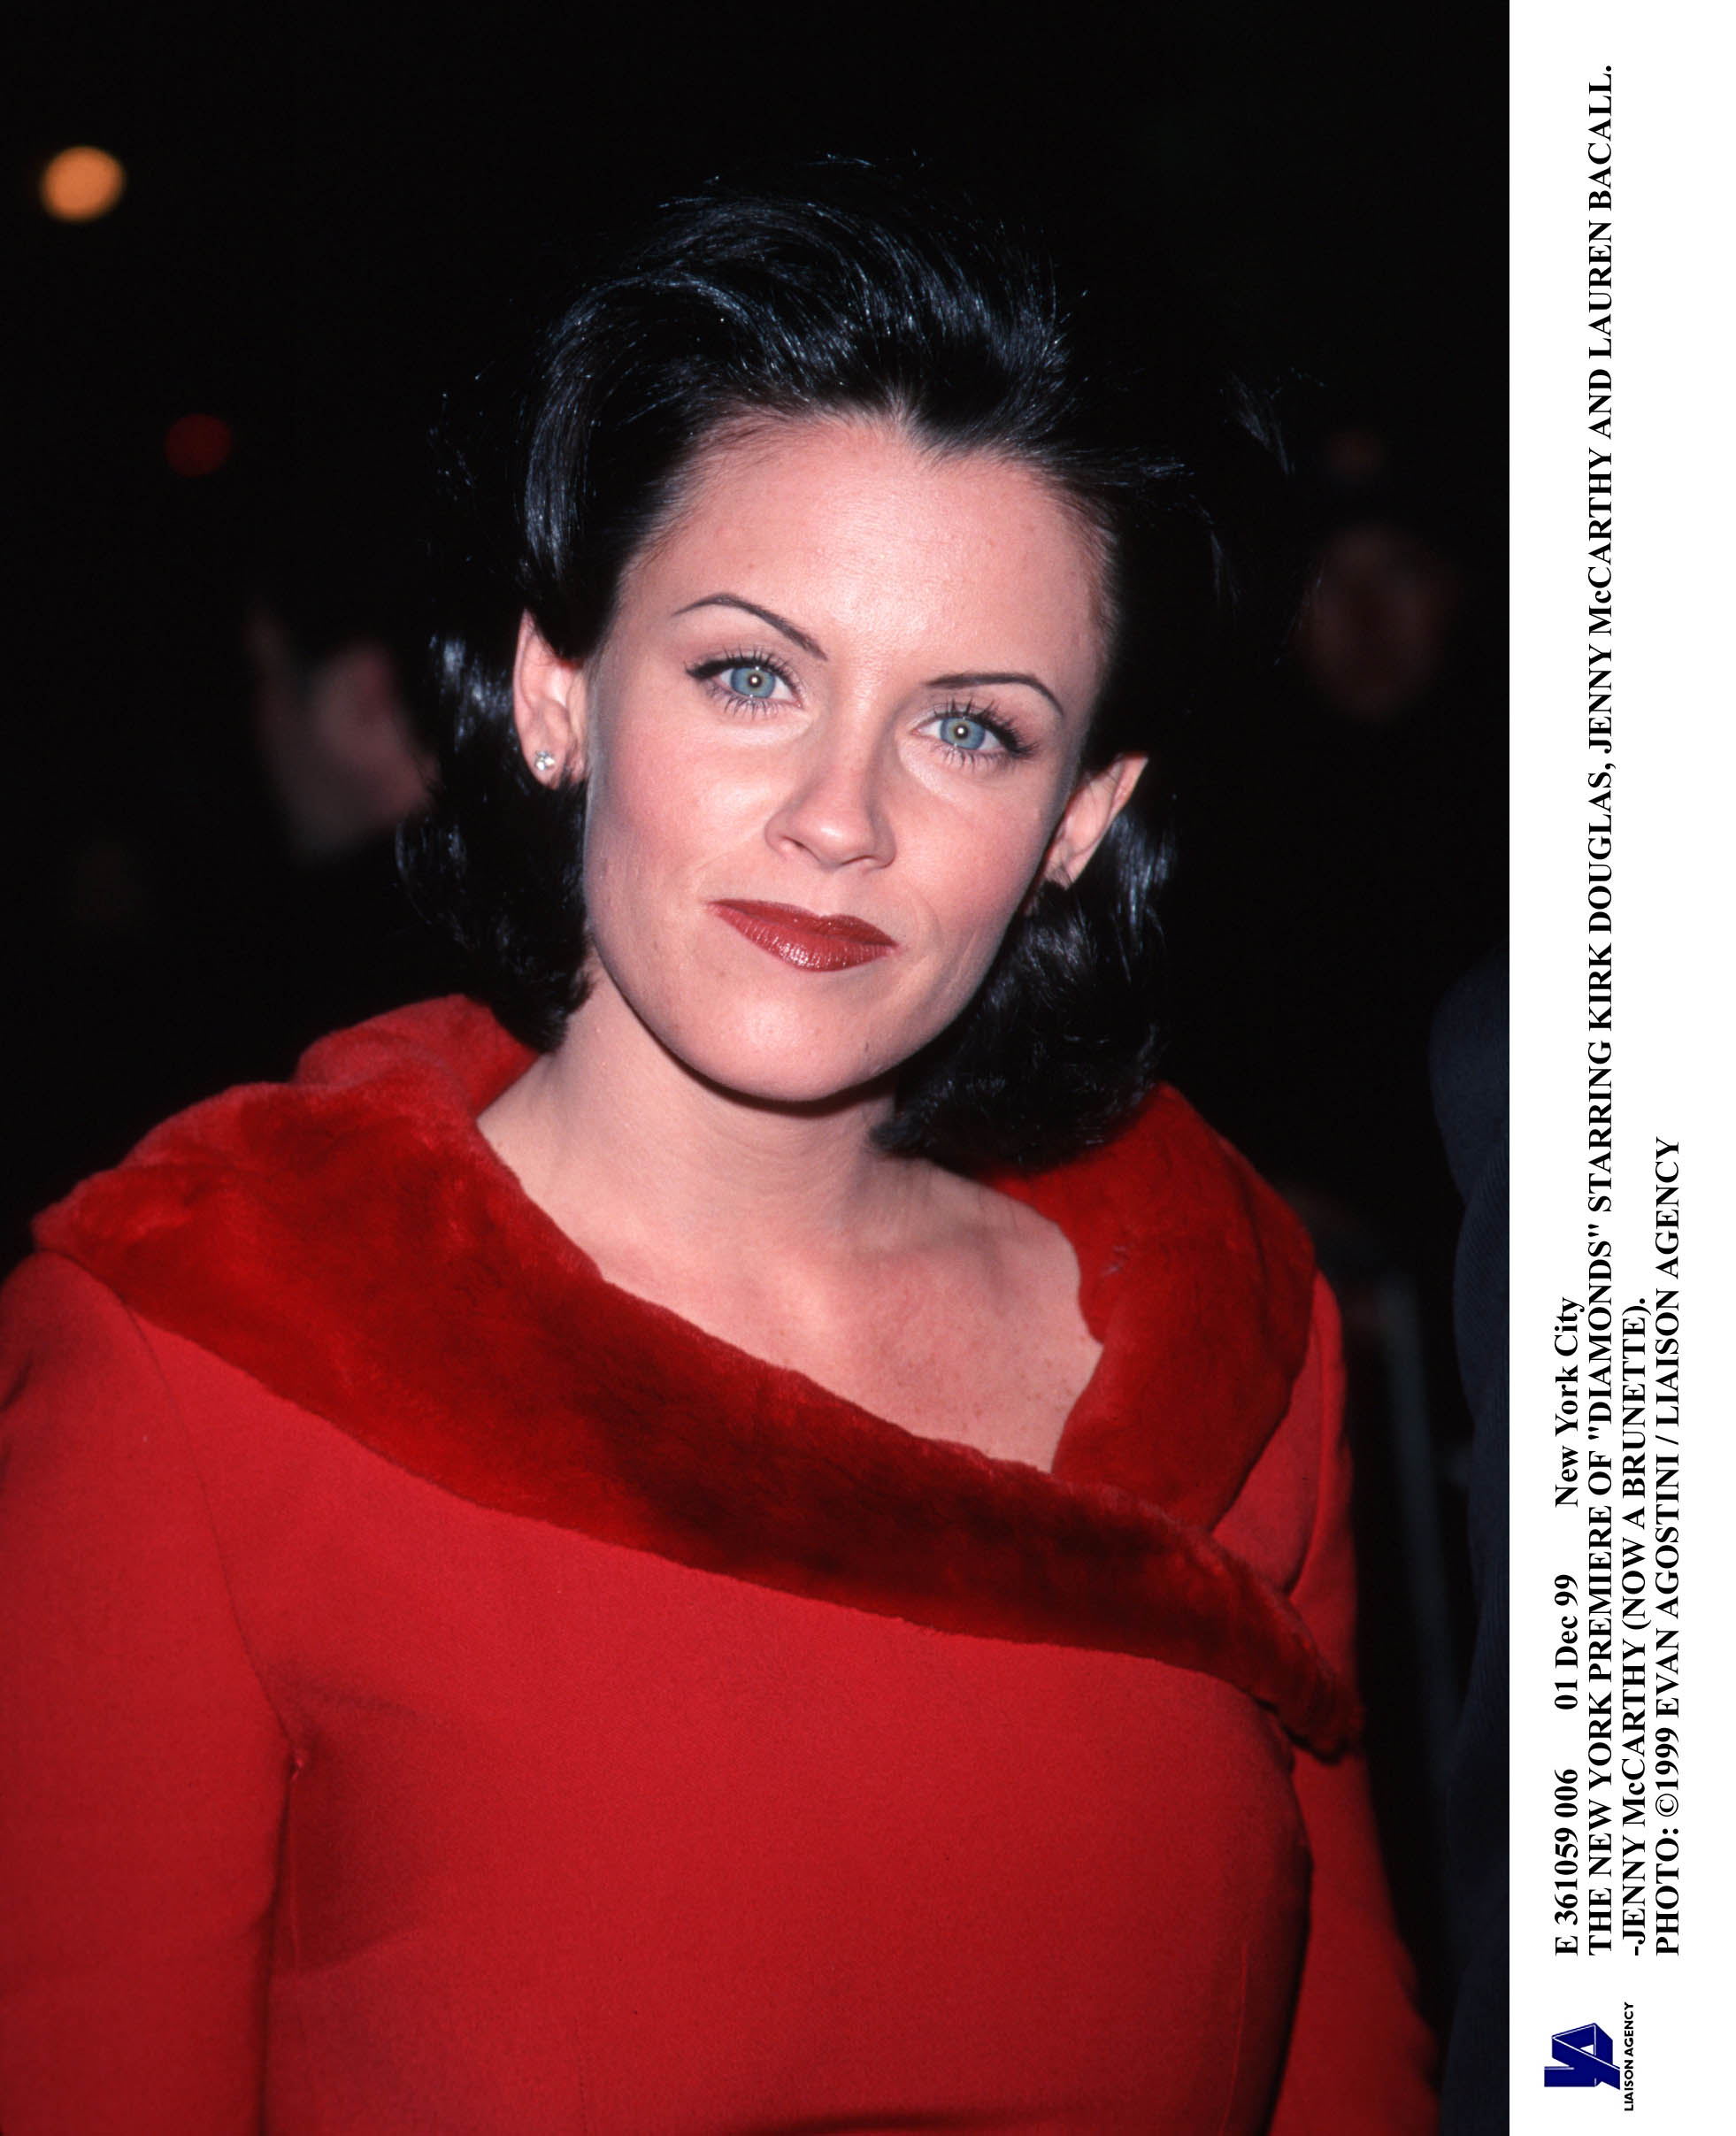 Jenny McCarthy at the New York premiere of "Diamonds," 1991 | Source: Getty Images